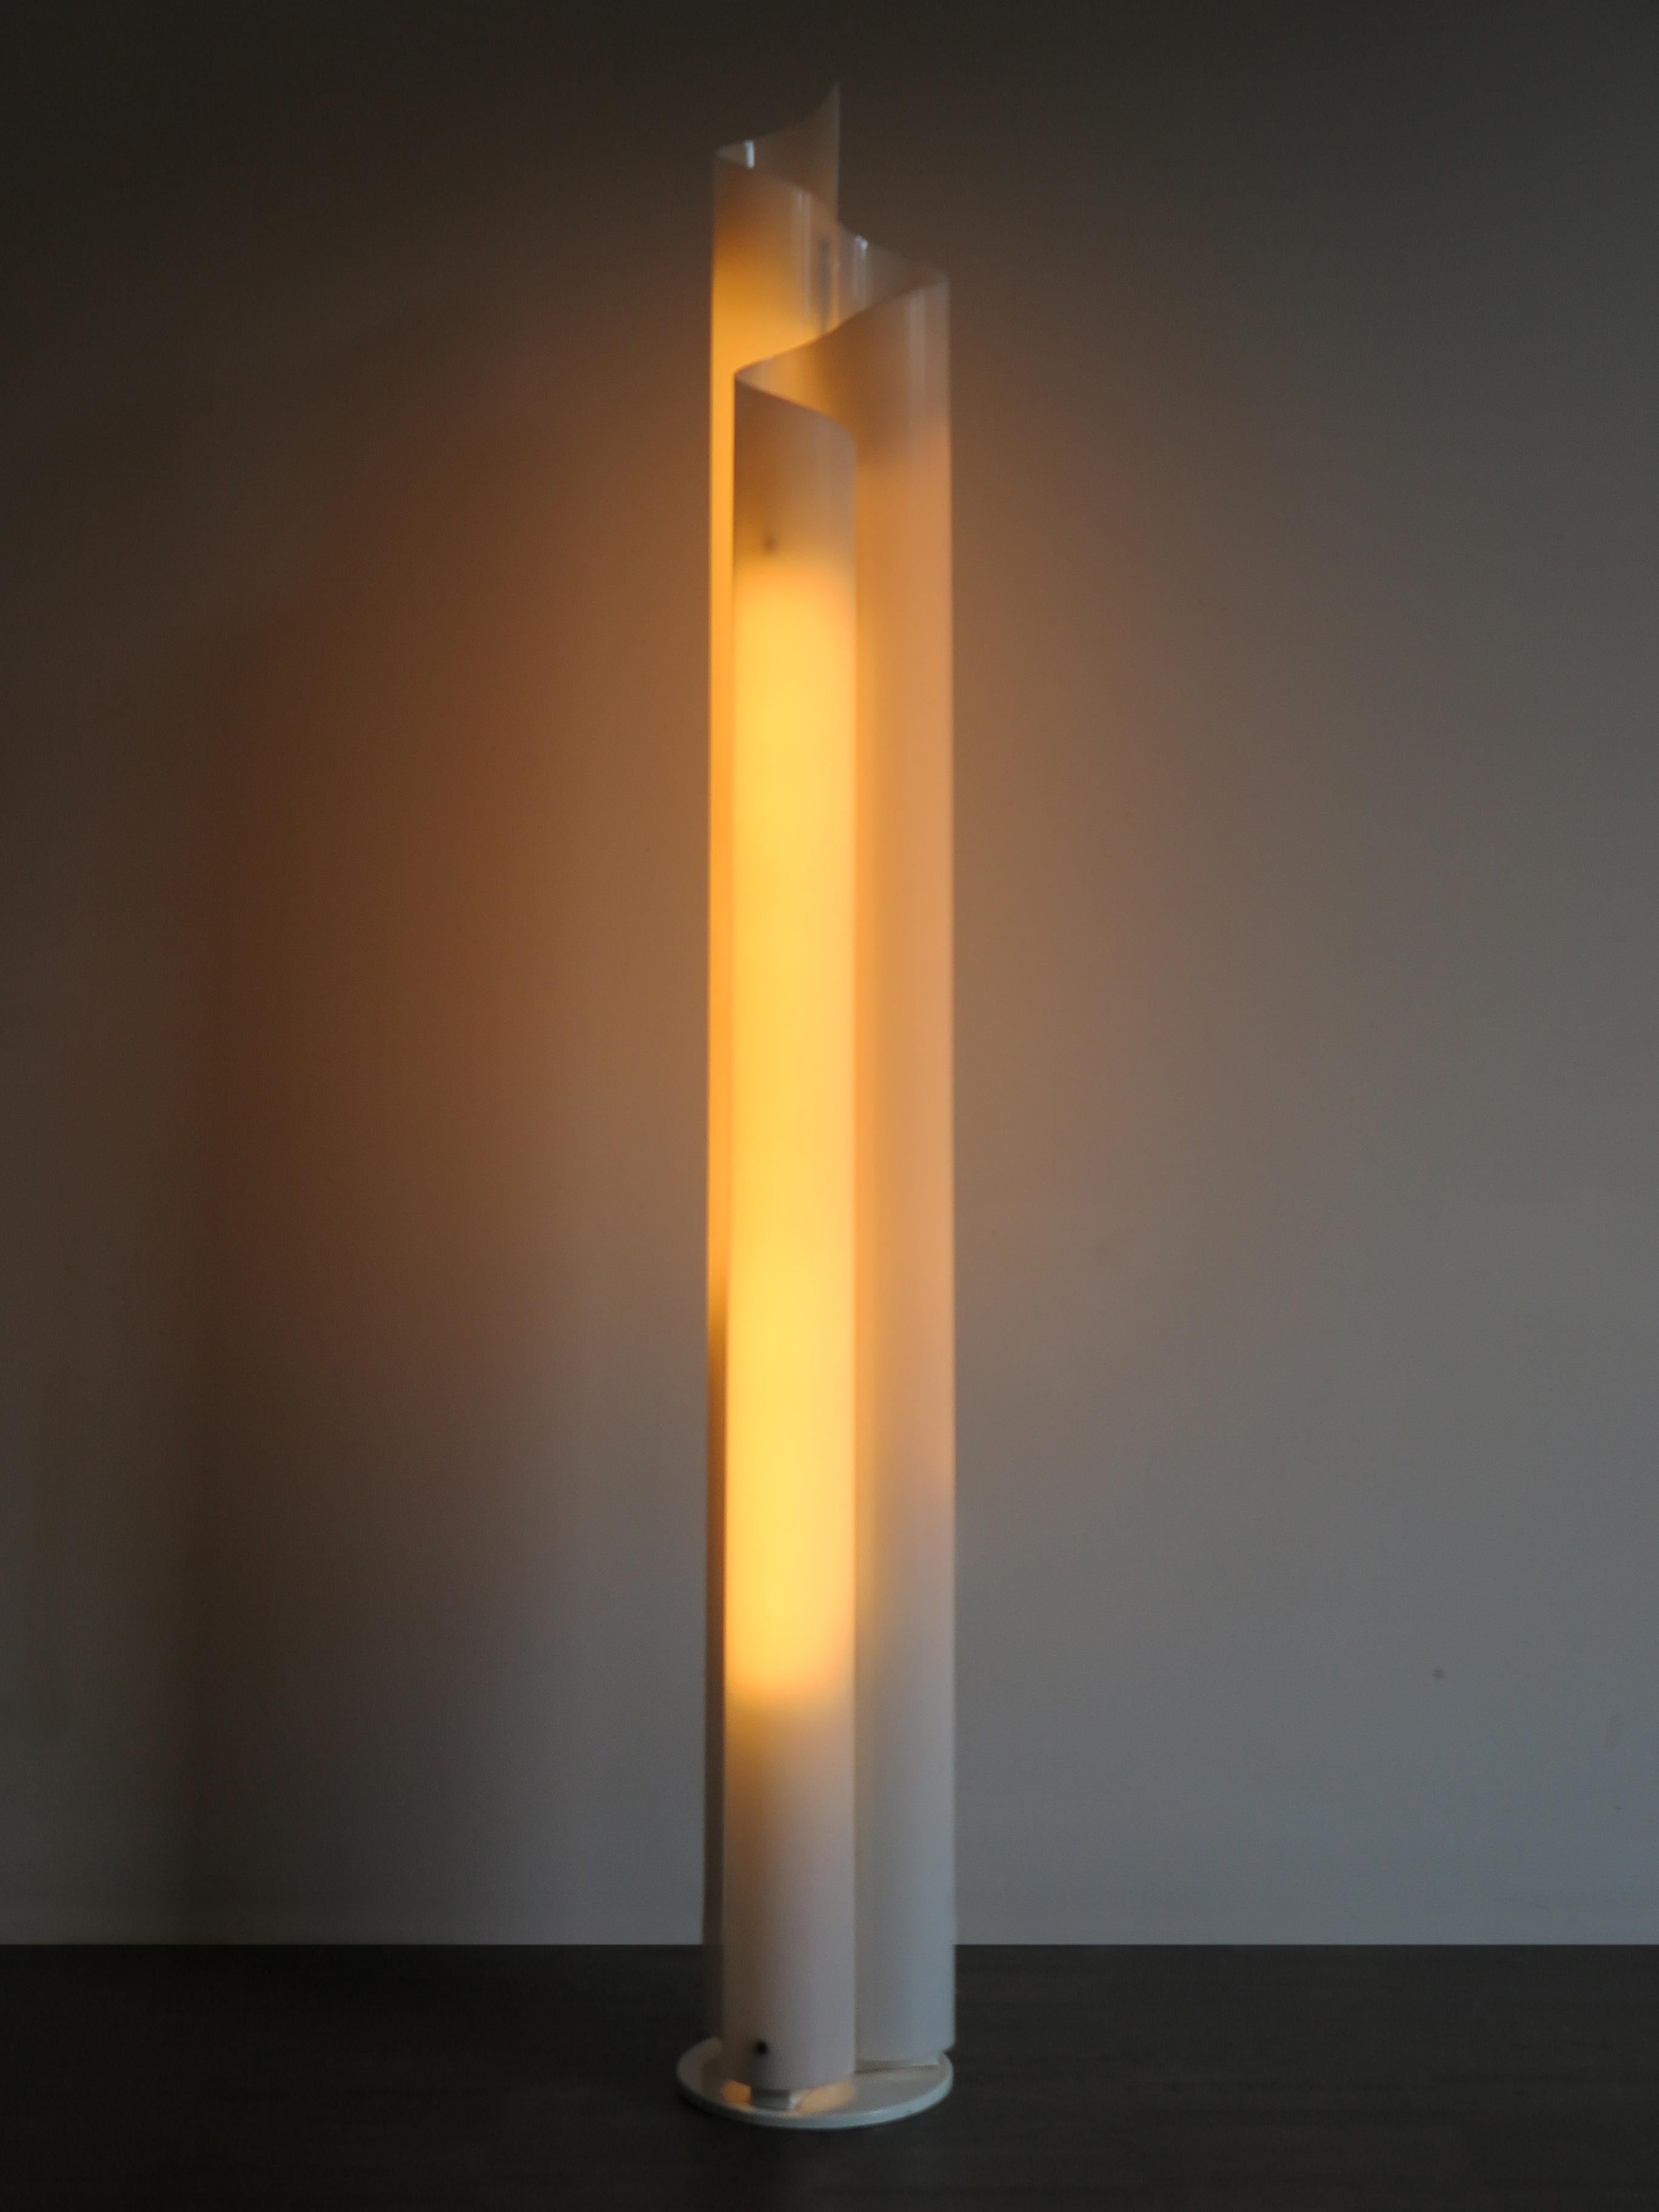 Elegant and minimal floor lamp chimera model designed by Vico Magistretti for Artemide in 1969, structure / diffuser in heat-curved white opal methacrylate and base in white painted metal.
Signed under the base.

The lamp is in its original